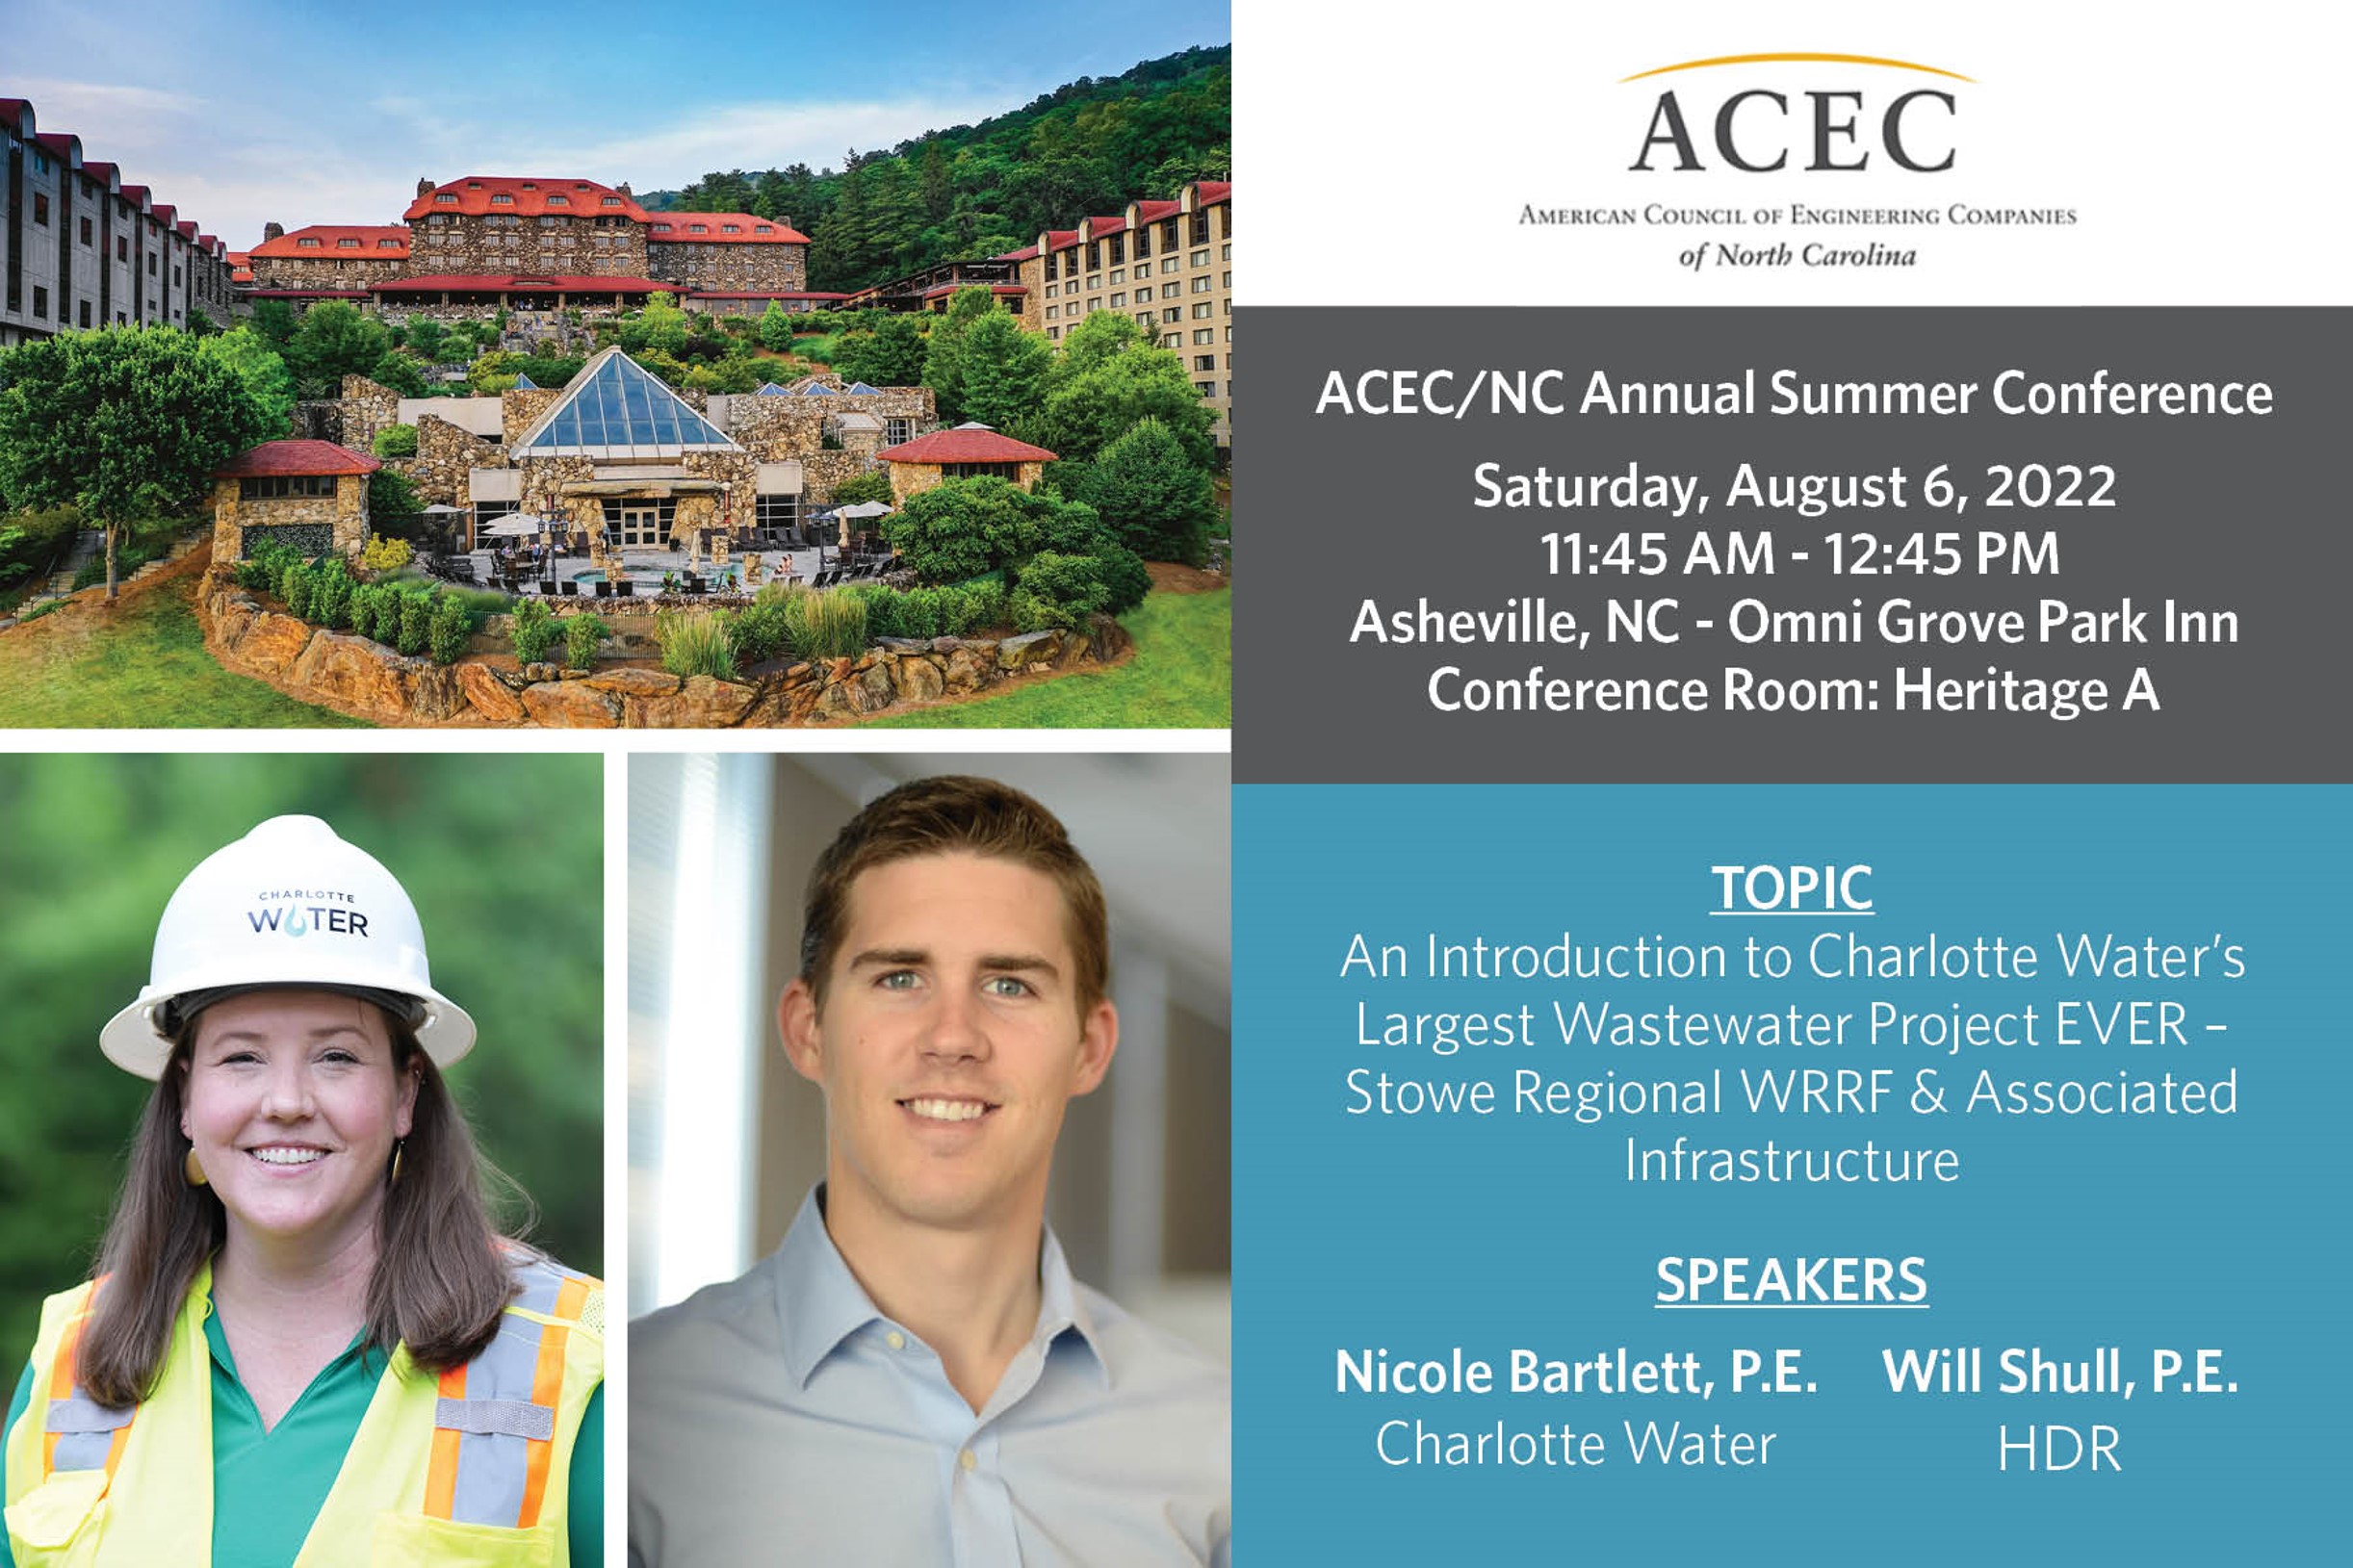 Promotional flyer for the American Council of Engineering Companies of North Carolina Summer Conference